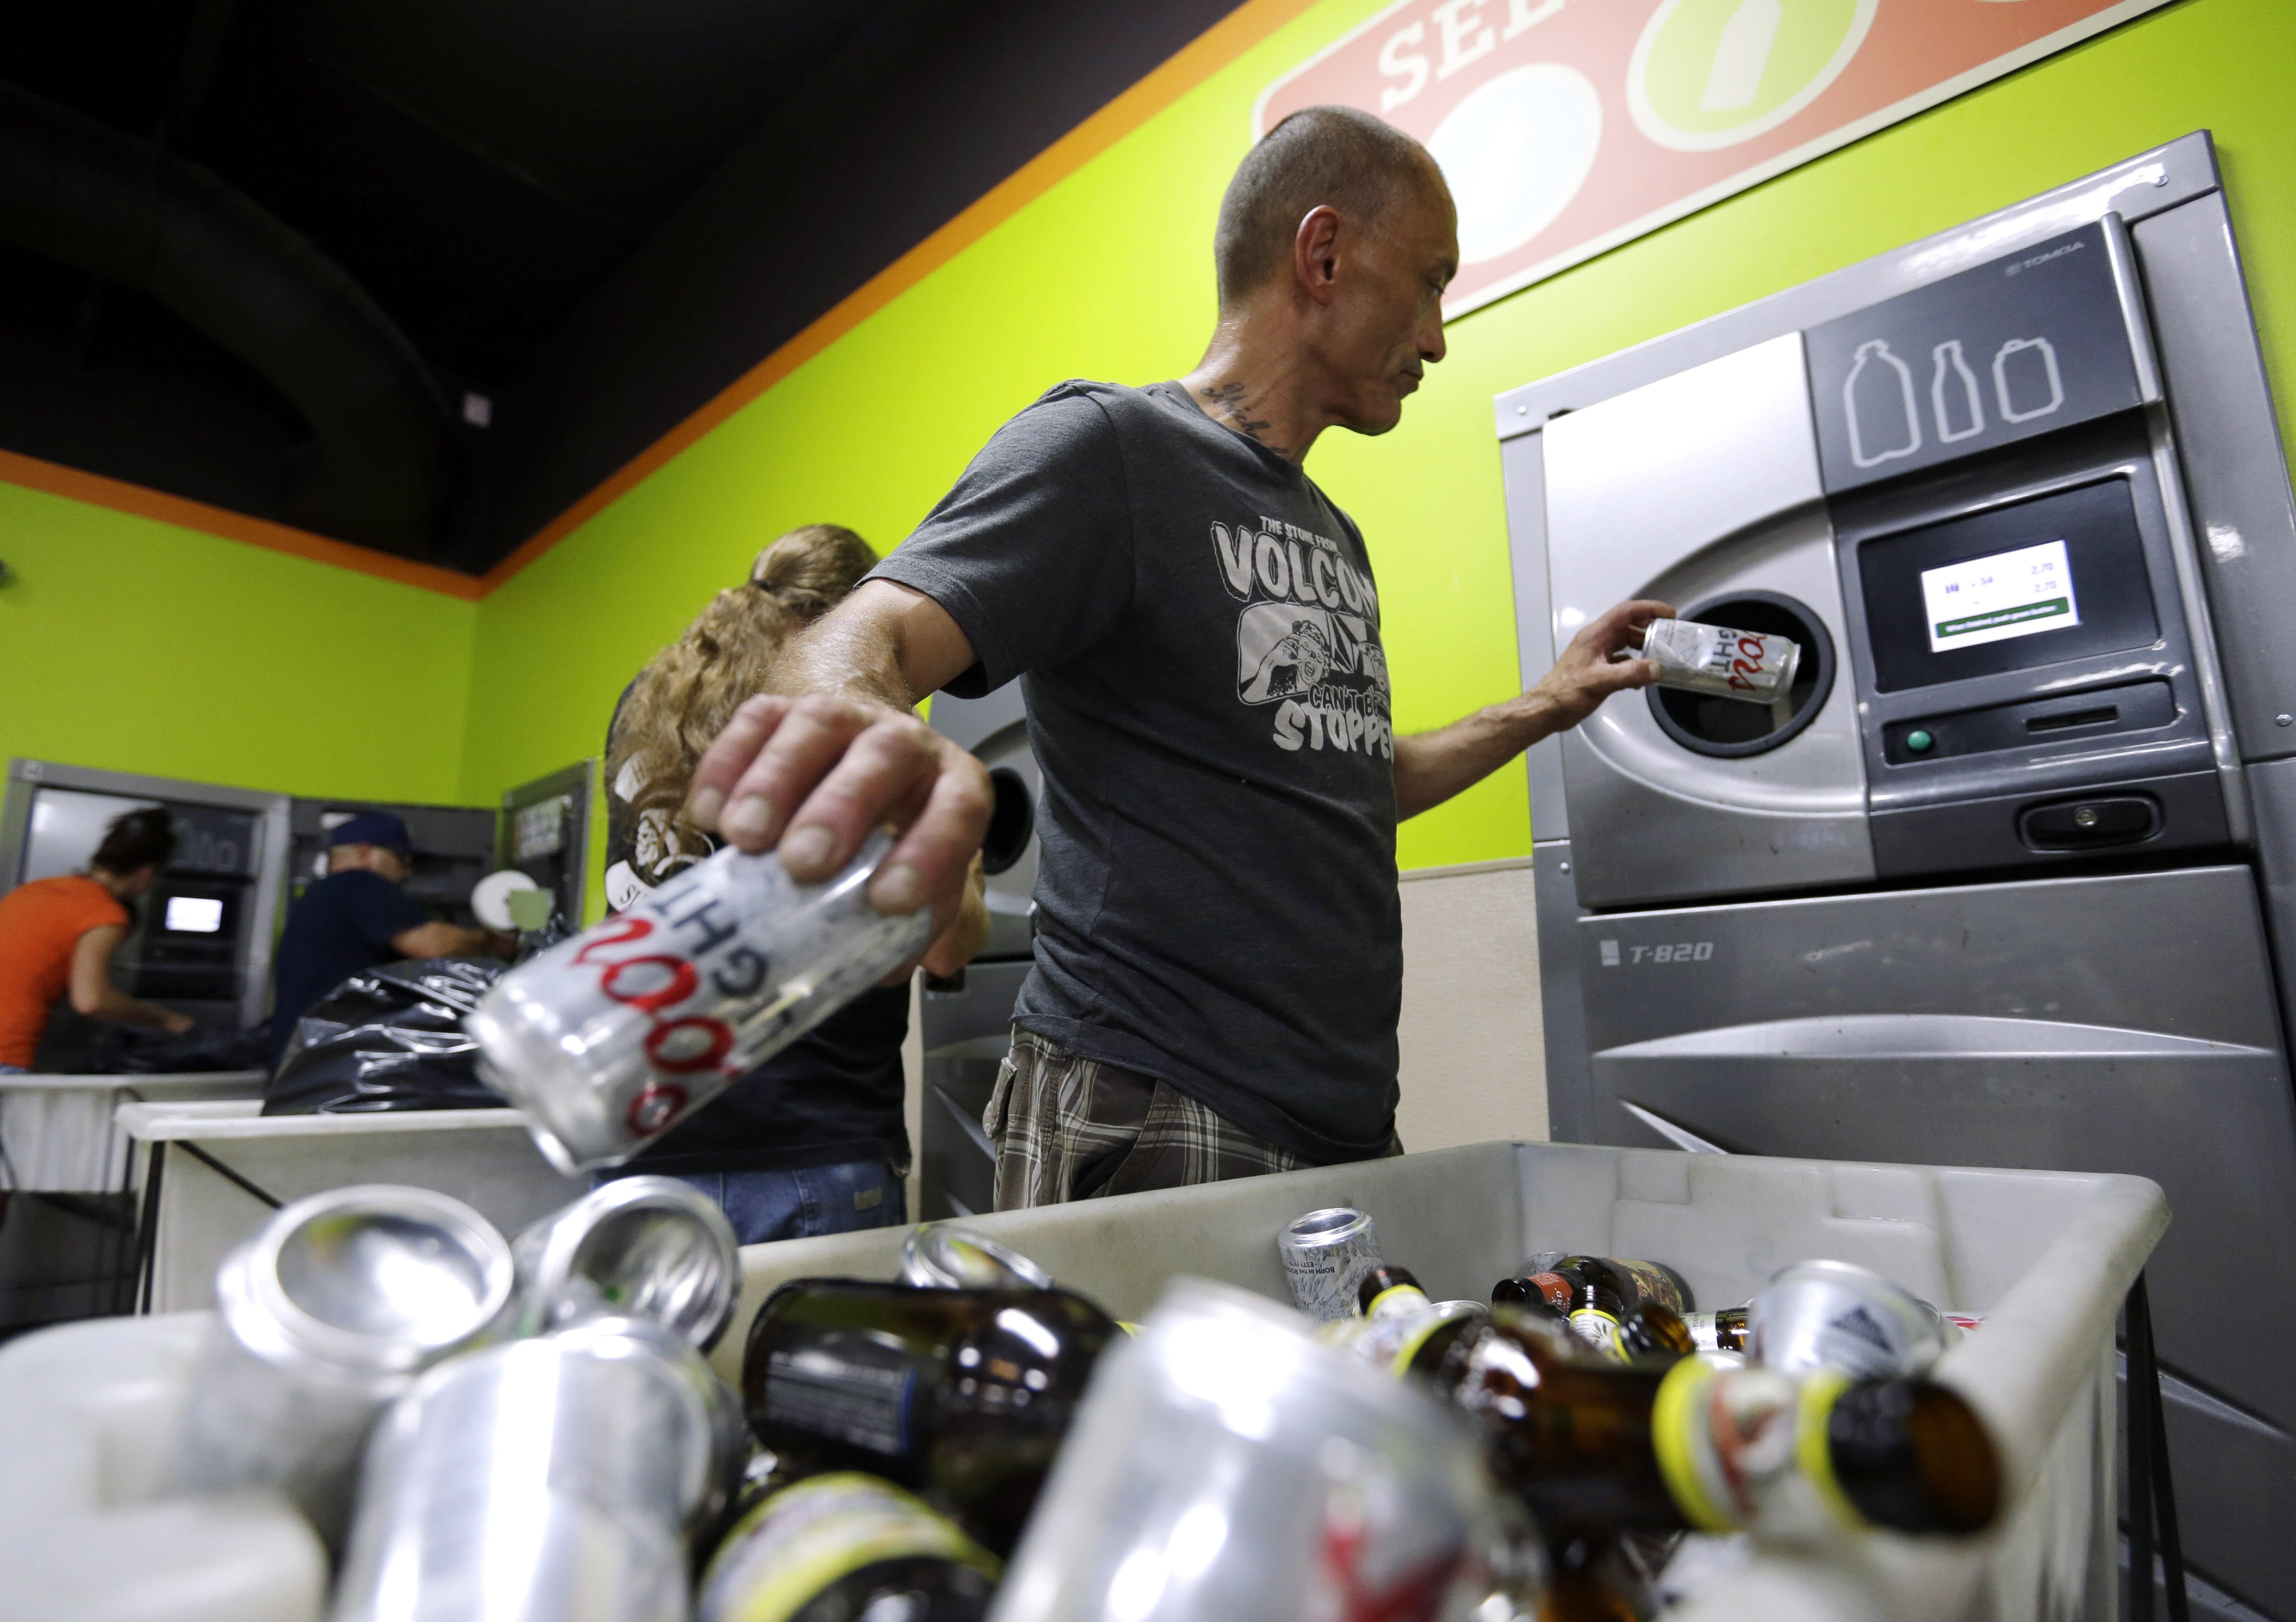 Michael Swadberg turns in bottles at a Bottledrop Oregon Redemption Center on July 31, 2015, in Gresham, Ore. Over the last year, reports of people rummaging through recycling bins have increased in Clark County. The target of these scavengers has been discarded bottles and cans, which have become increasingly valuable on the other side of the Columbia River. While local governments in Clark County have limited tools and their efforts are just starting, they could soon get help from Oregon. Last week, the Oregon Legislature passed a bill that's intended to deter people seeking to cash in on out-of-state containers.